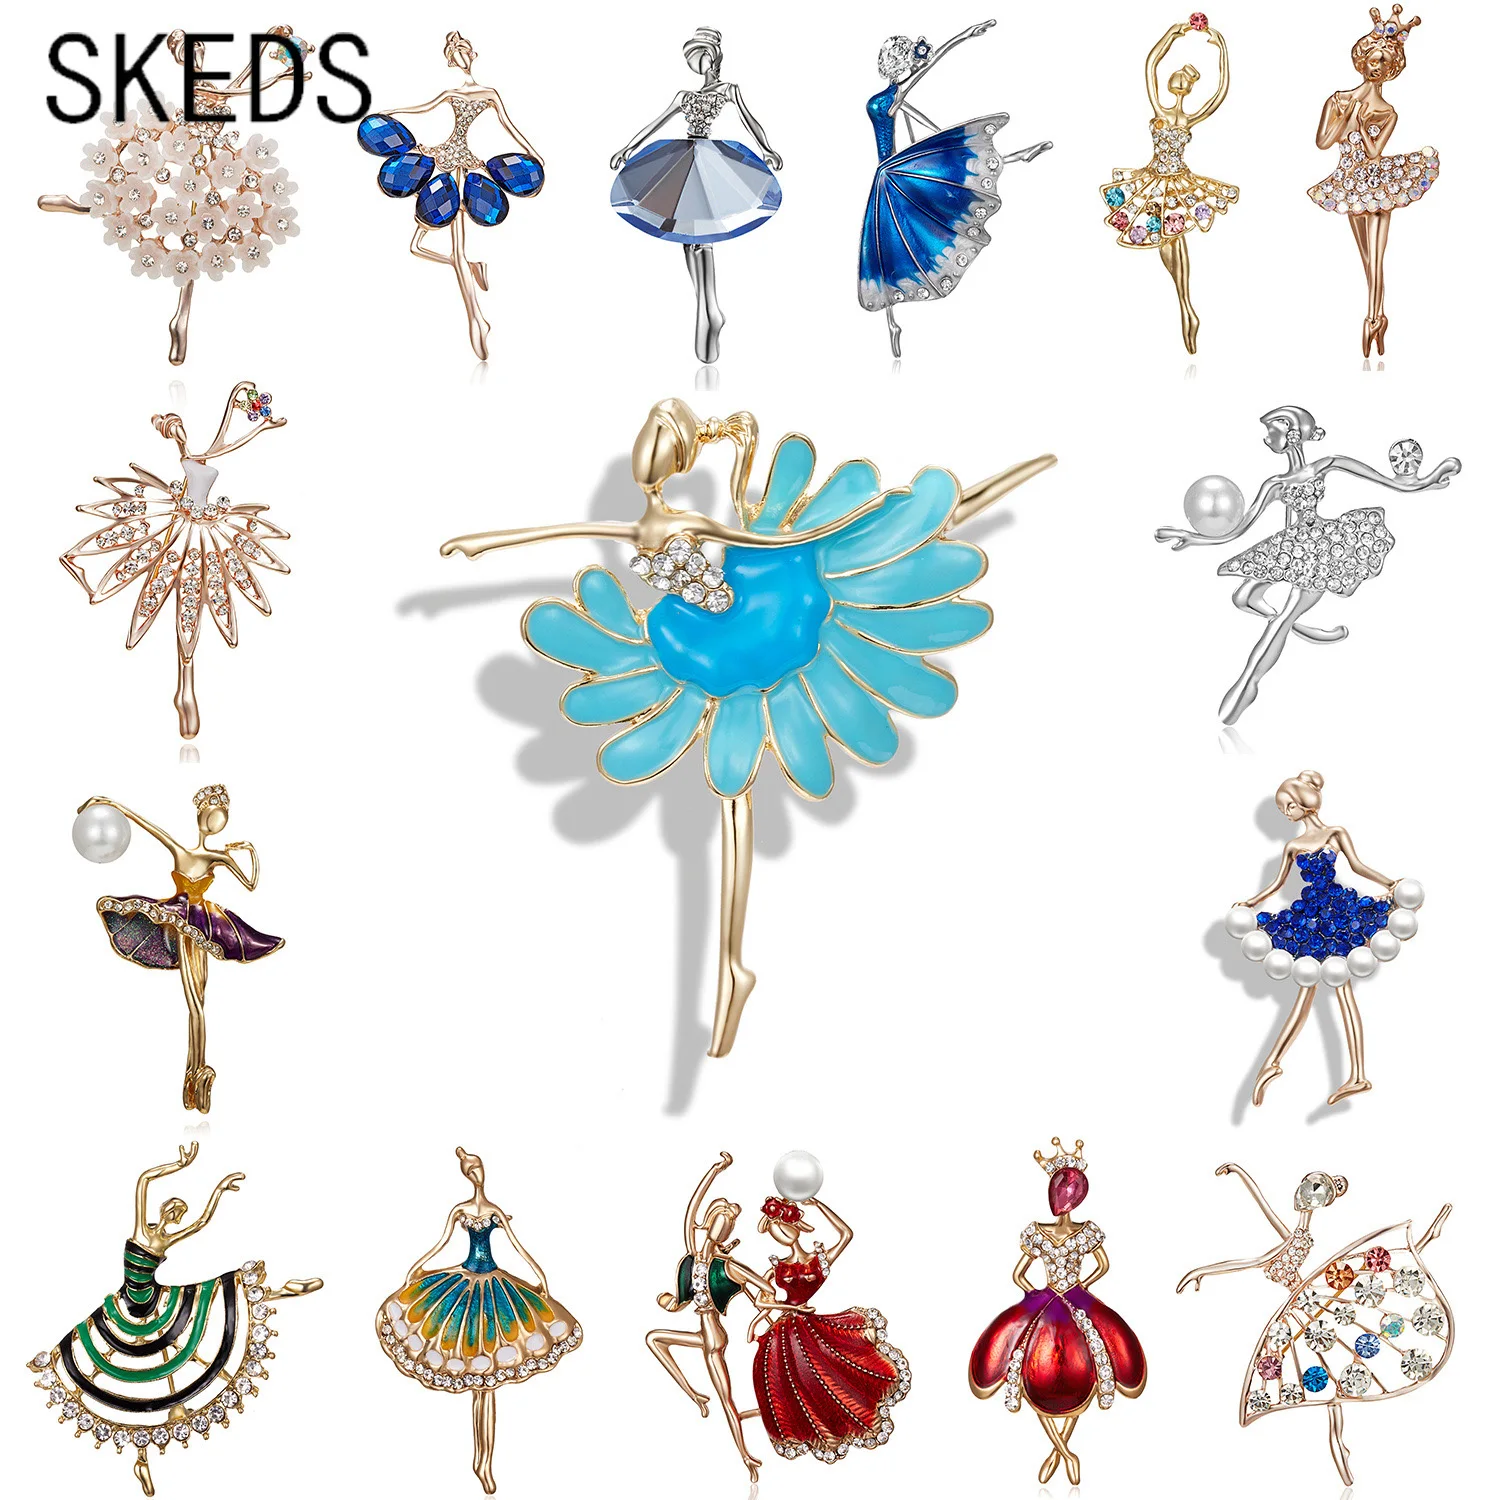 

SKEDS Exquisite Crystal Ballet Dancer Brooches Jewelry Pins For Lady Elegant Women's Brooch Pin Decorative Suit Clothing Badges